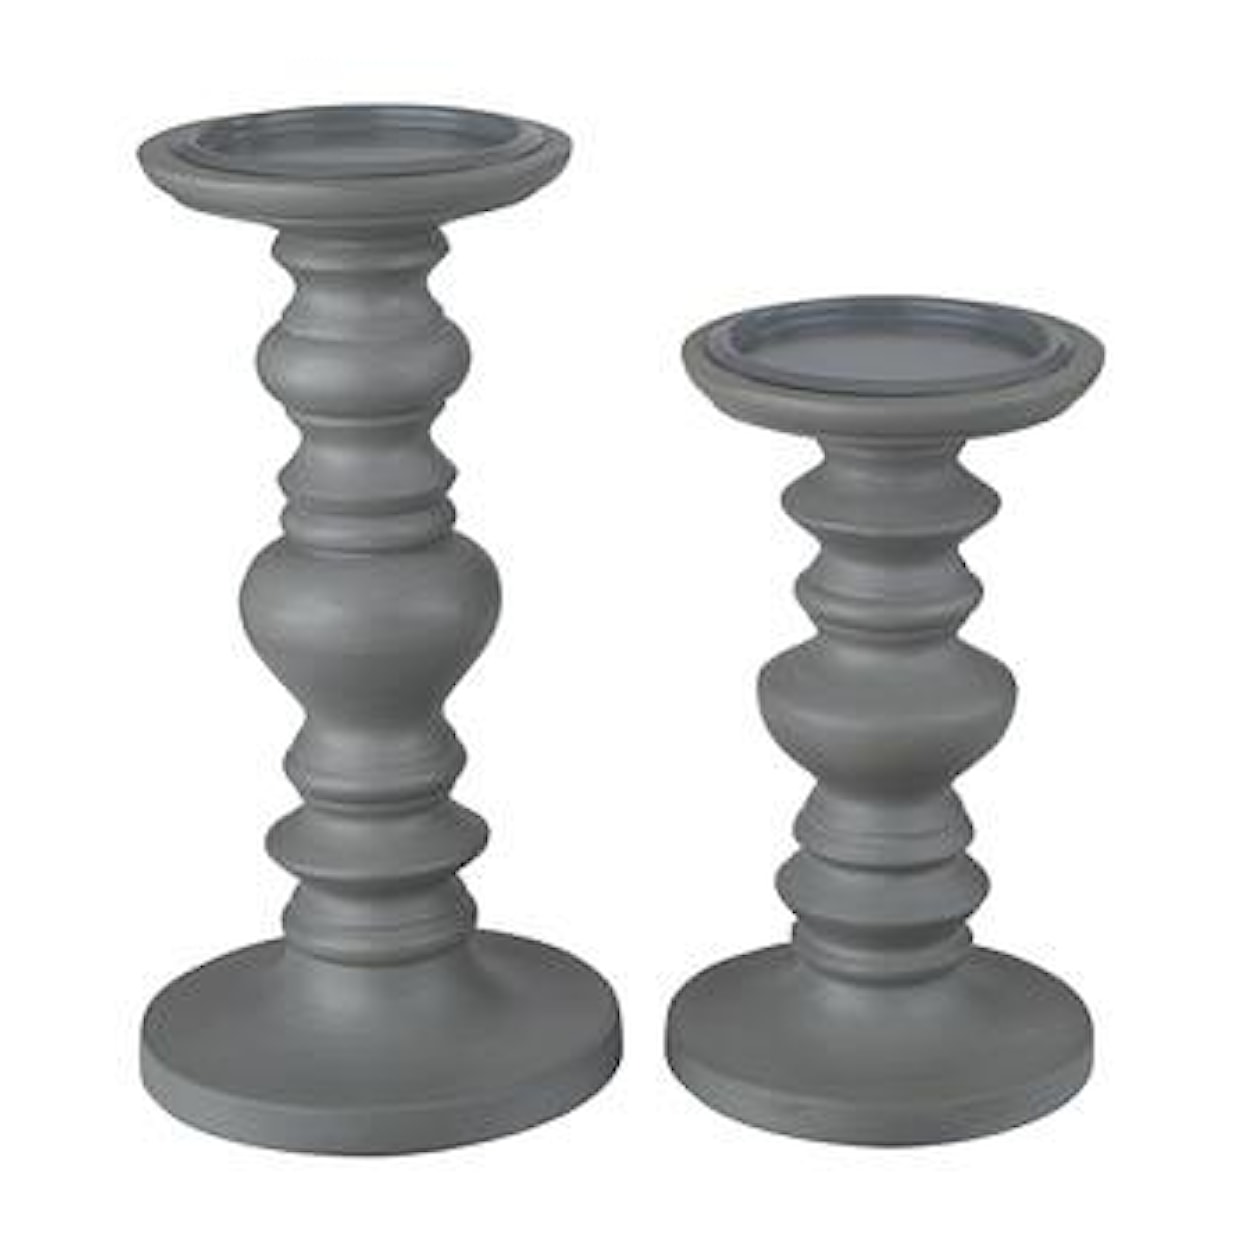 Ashley Furniture Signature Design Accents Set of Candle Holders